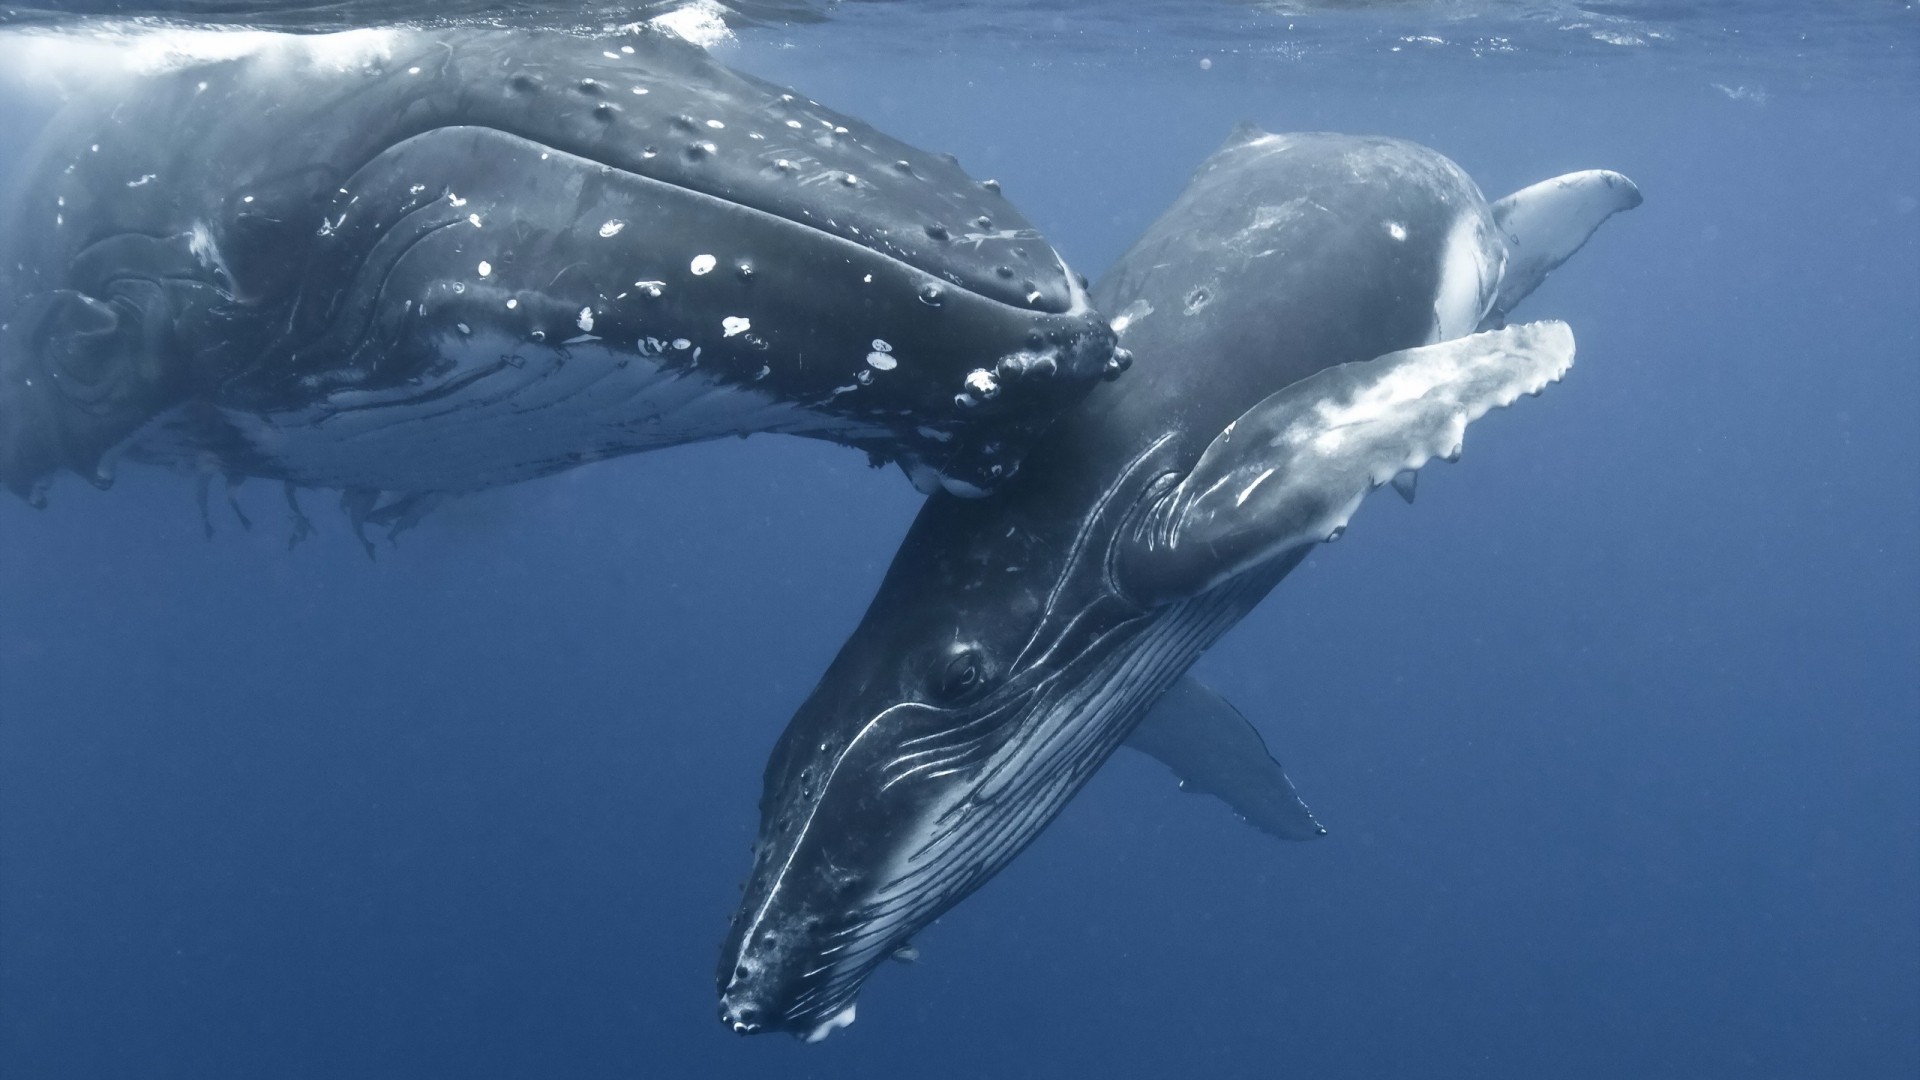 General 1920x1080 nature animals whale water sea underwater baby animals mammals photography humpback whale sea life